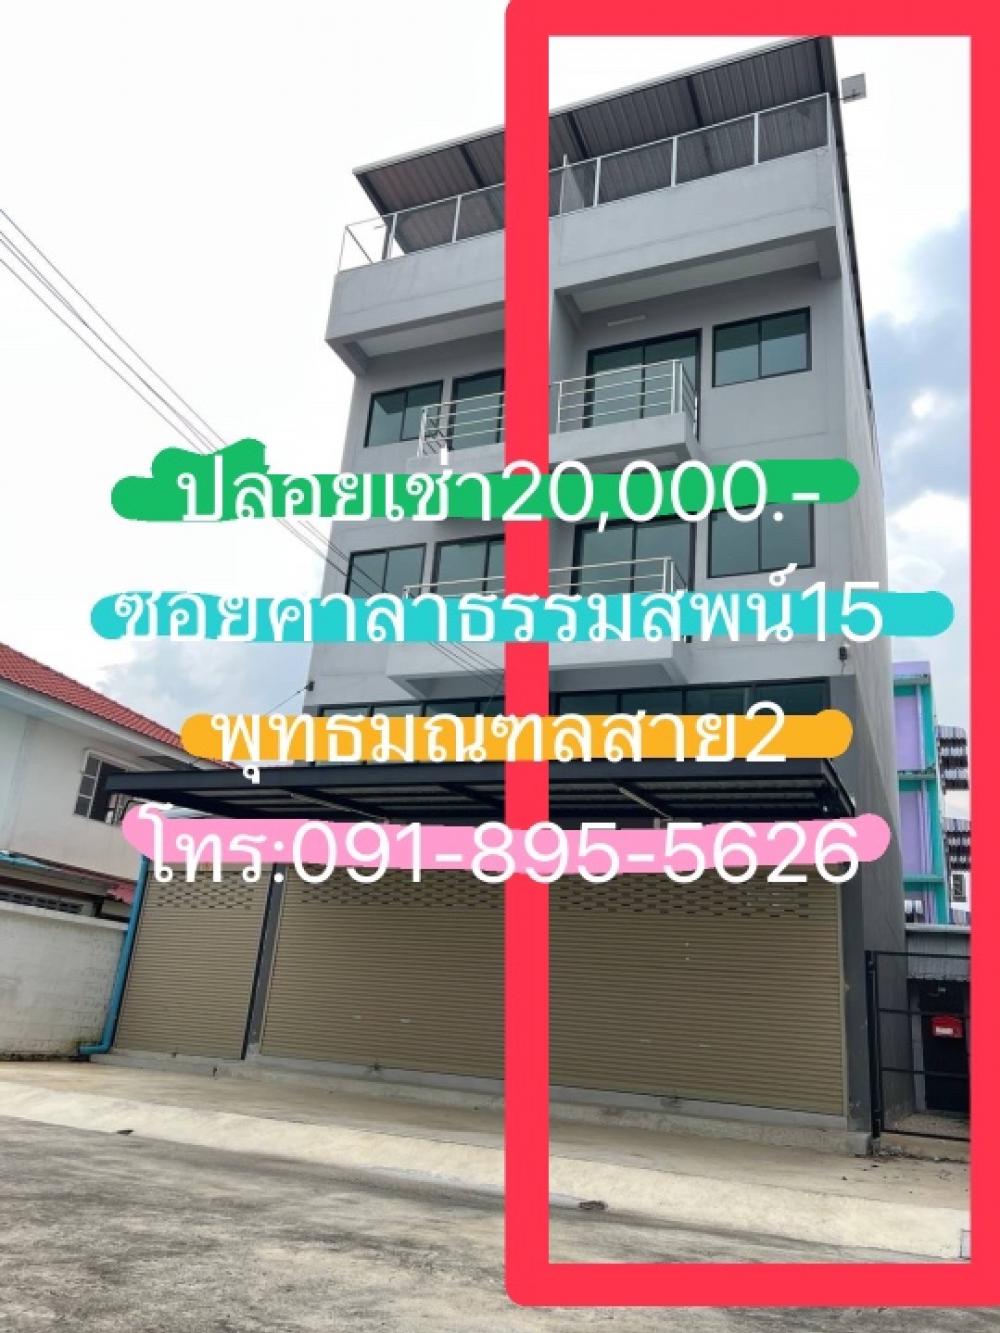 For RentShophousePhutthamonthon, Salaya : ⭕️Reduced price 5,000 baht New building for rent Only 20,000 baht/month left, 3.5-story building, Soi Sala Thammasop 15, Phutthamonthon Sai 2. Adding and strengthening the structure Increase usable space, store stock, online business, home office